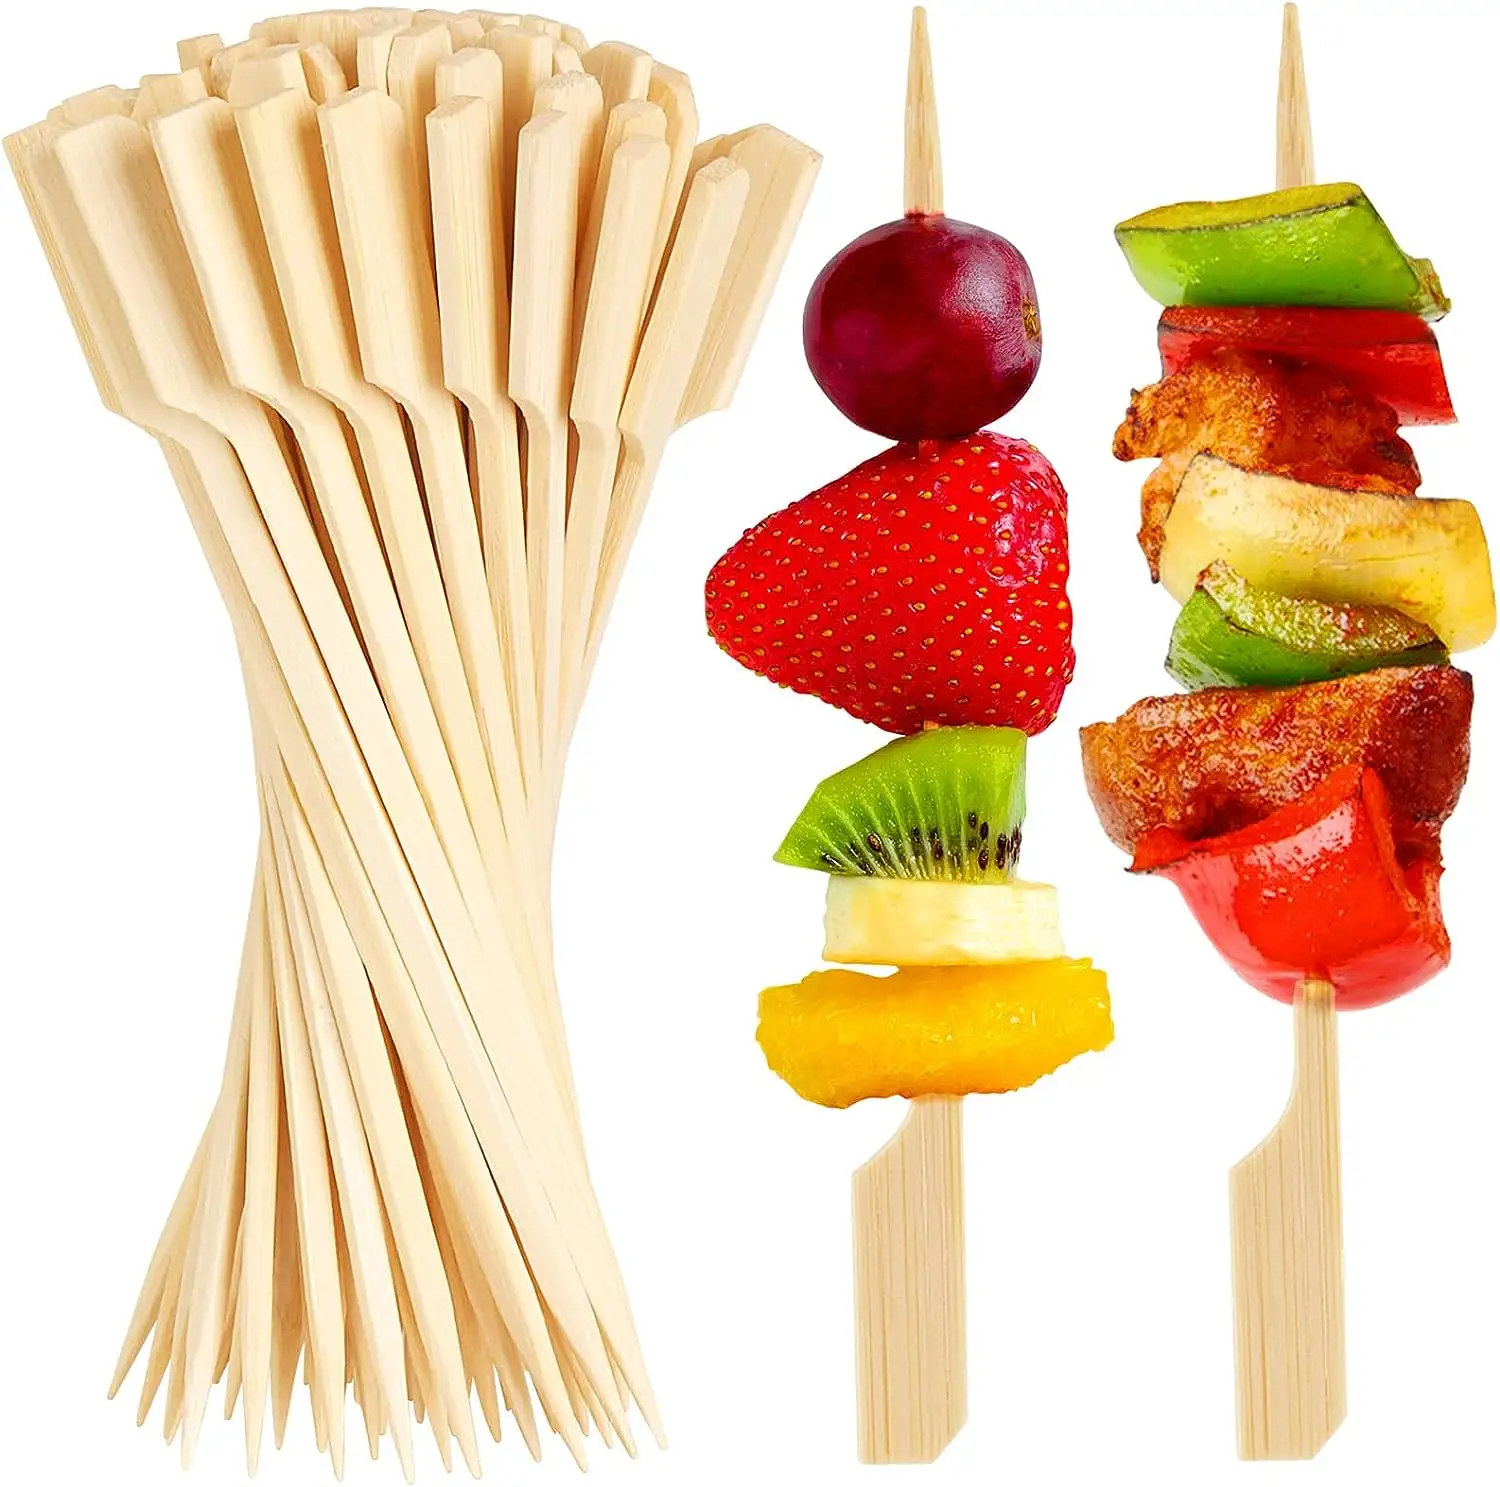 Natural Disposable Bamboo Barbecue Free Sample Bbq Sticks Wooden Skewers for Disposable Wooden Sticks For Party